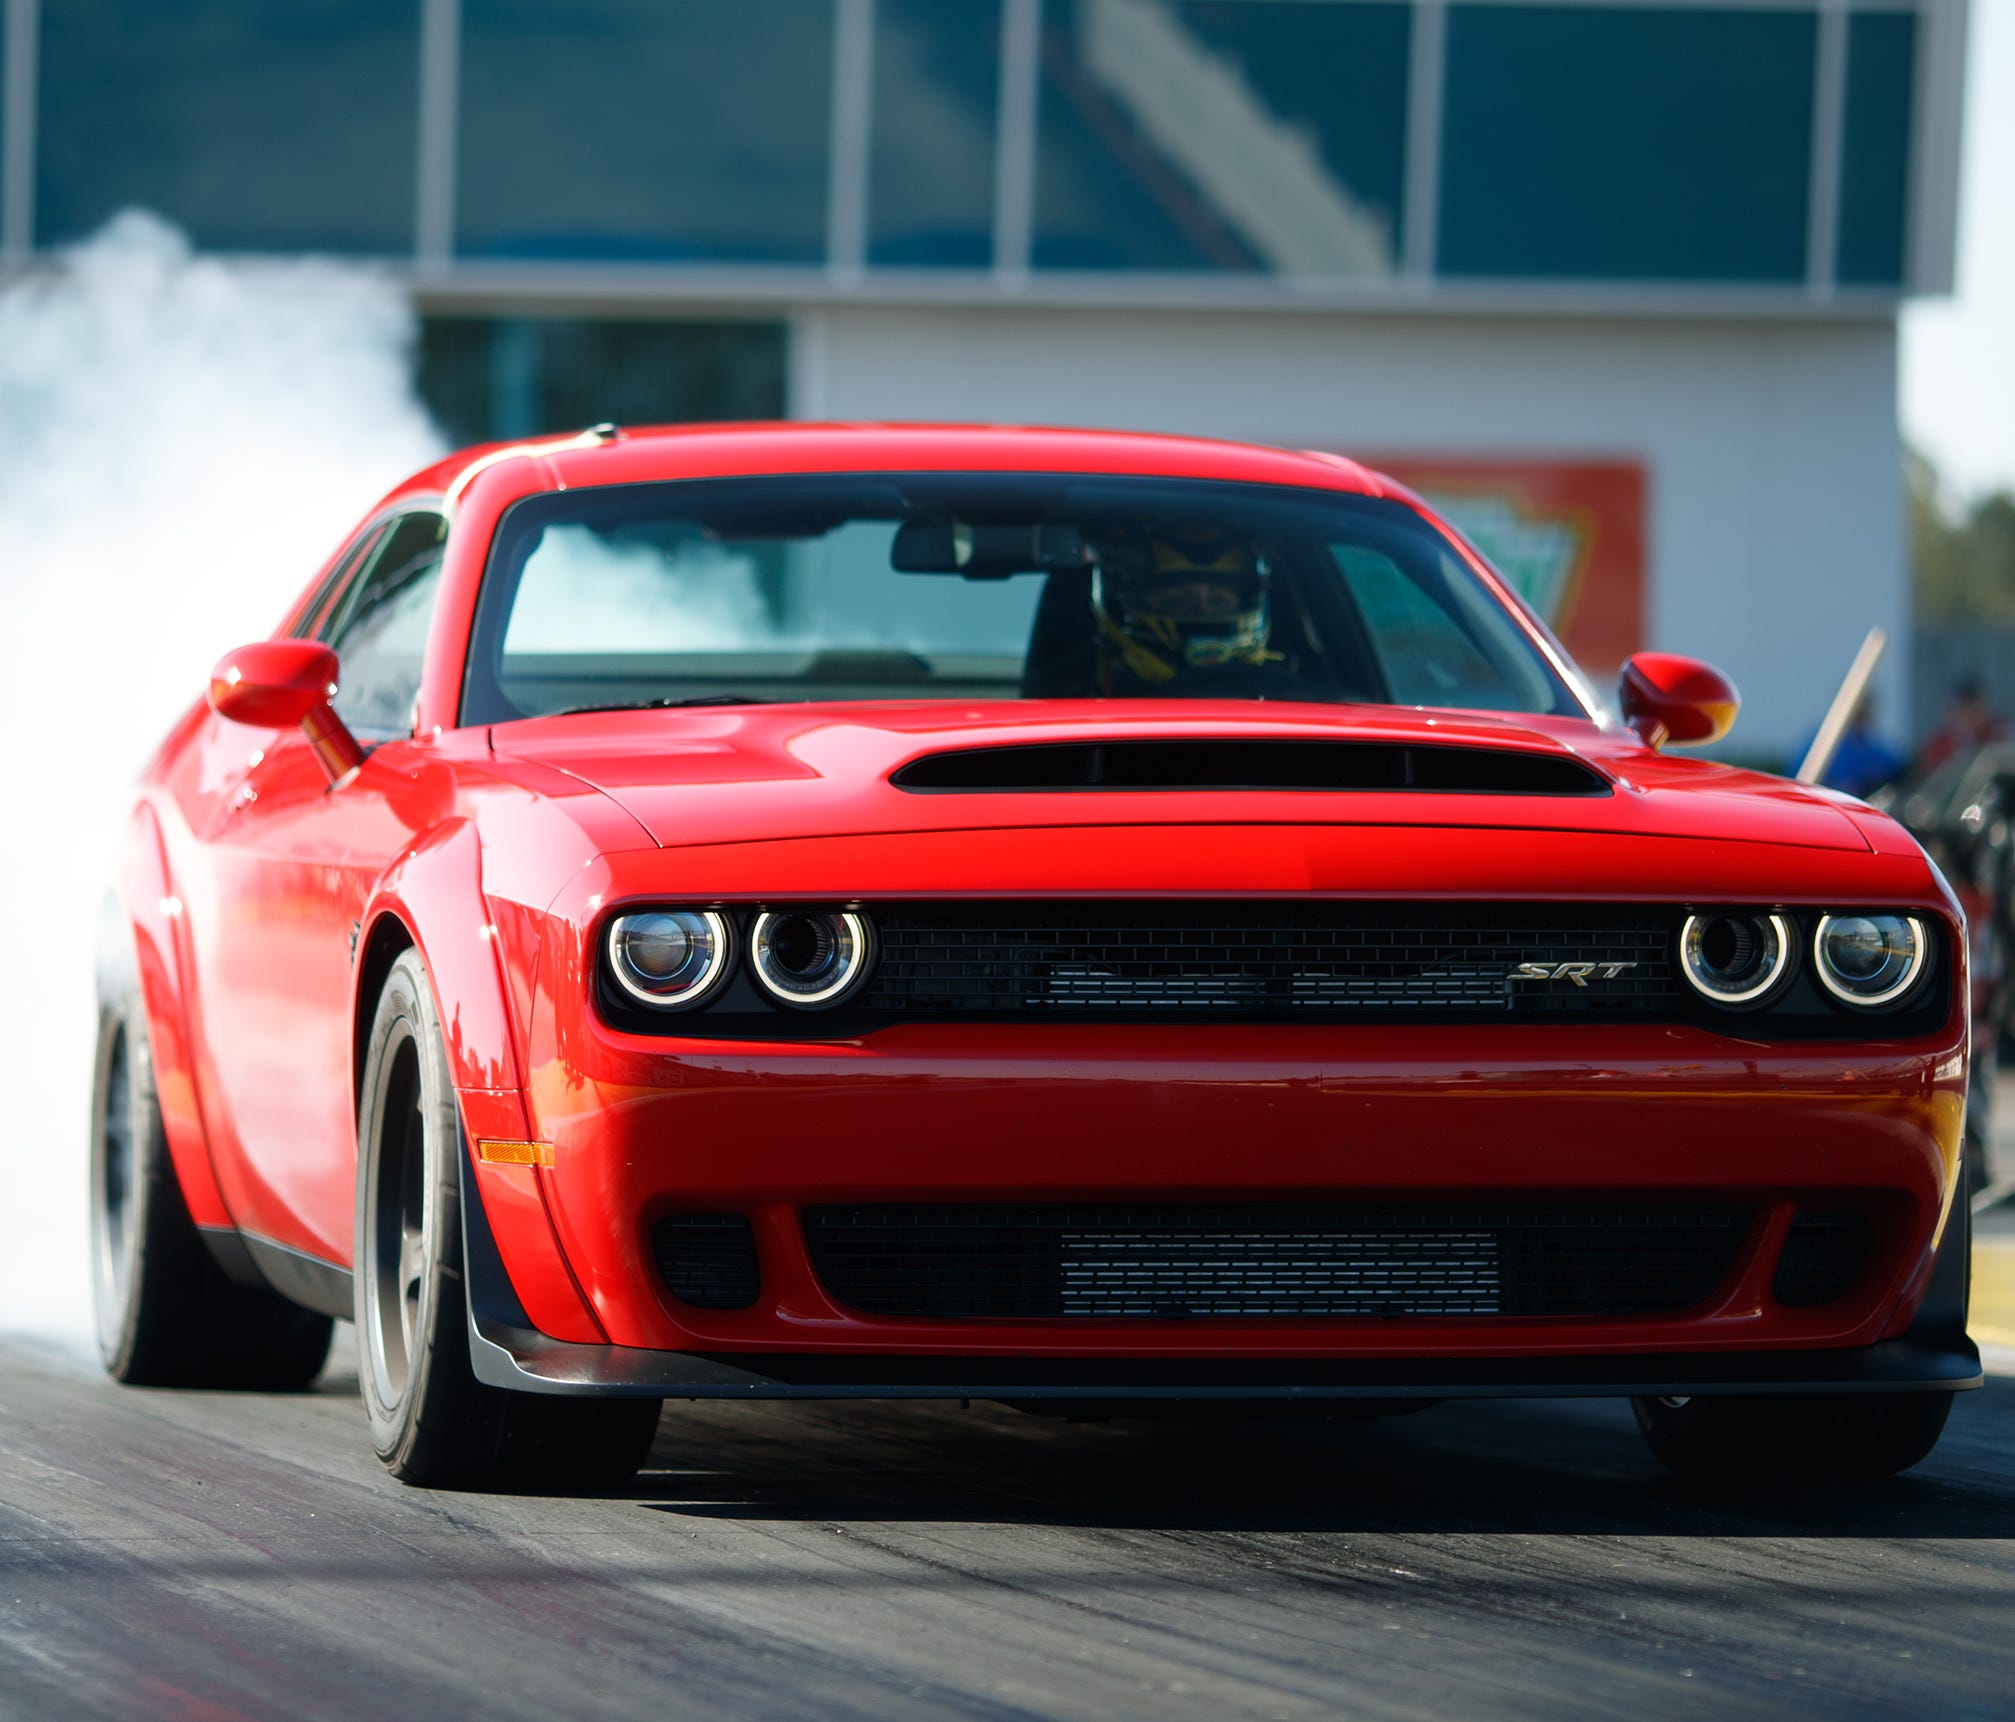 2018 Dodge Challenger SRT Demon comes to showrooms this fall